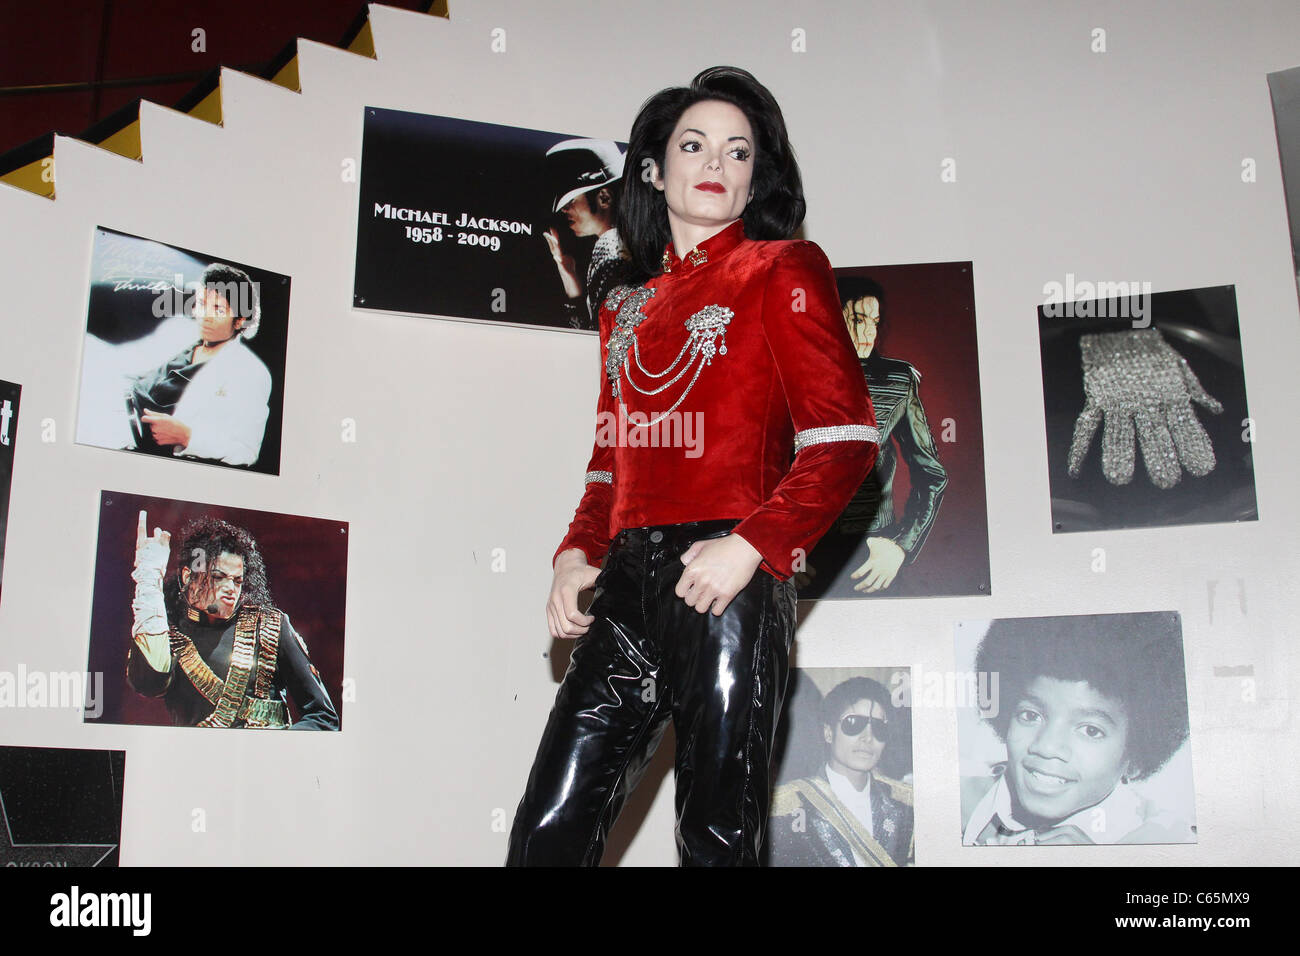 Michael Jackson Wax Figure inside for Michael Jackson Tribute Exhibit at Madame Tussauds, Madame Tussauds New York, New York, NY June 23, 2010. Photo By: Rob Kim/Everett Collection Stock Photo